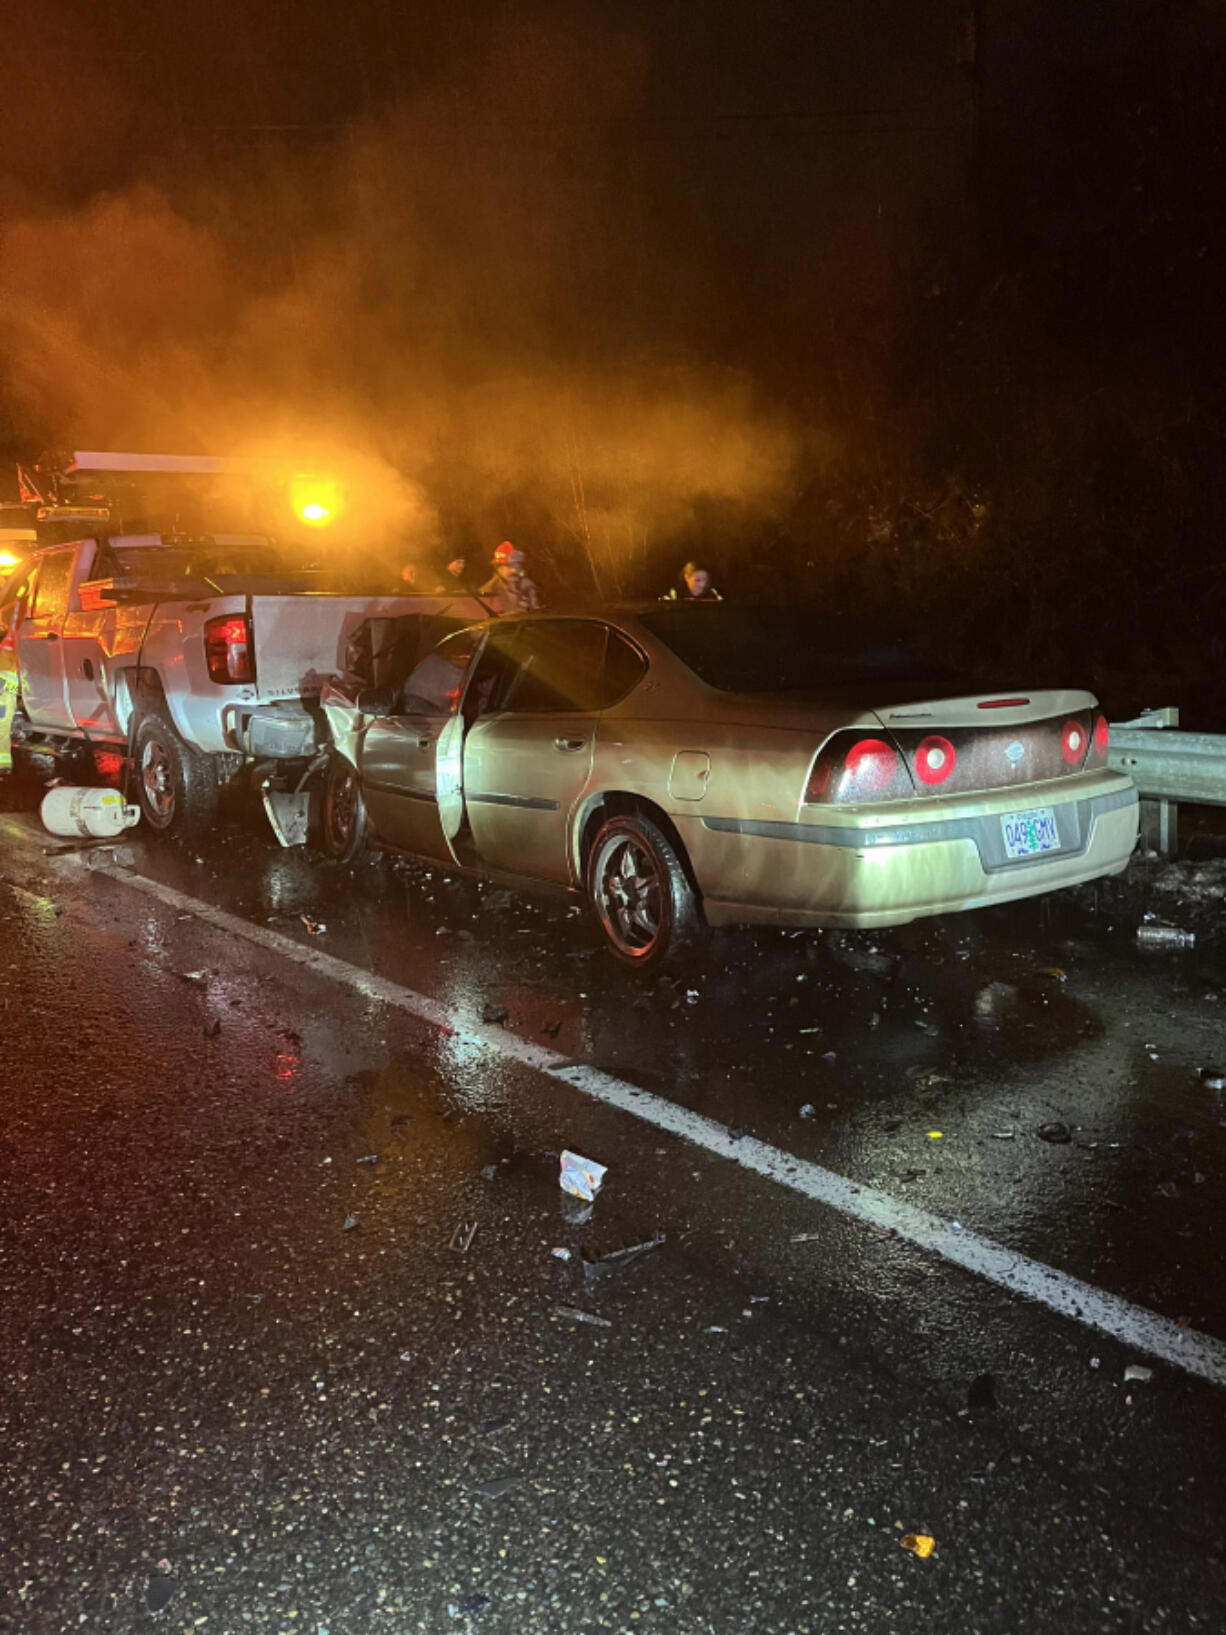 A three-vehicle crash in January on Interstate 5 near Vancouver sent six workers to the hospital. A suspected drunk driver crashed into the rear of a WSDOT pickup truck, which pushed the truck into the rear of another.